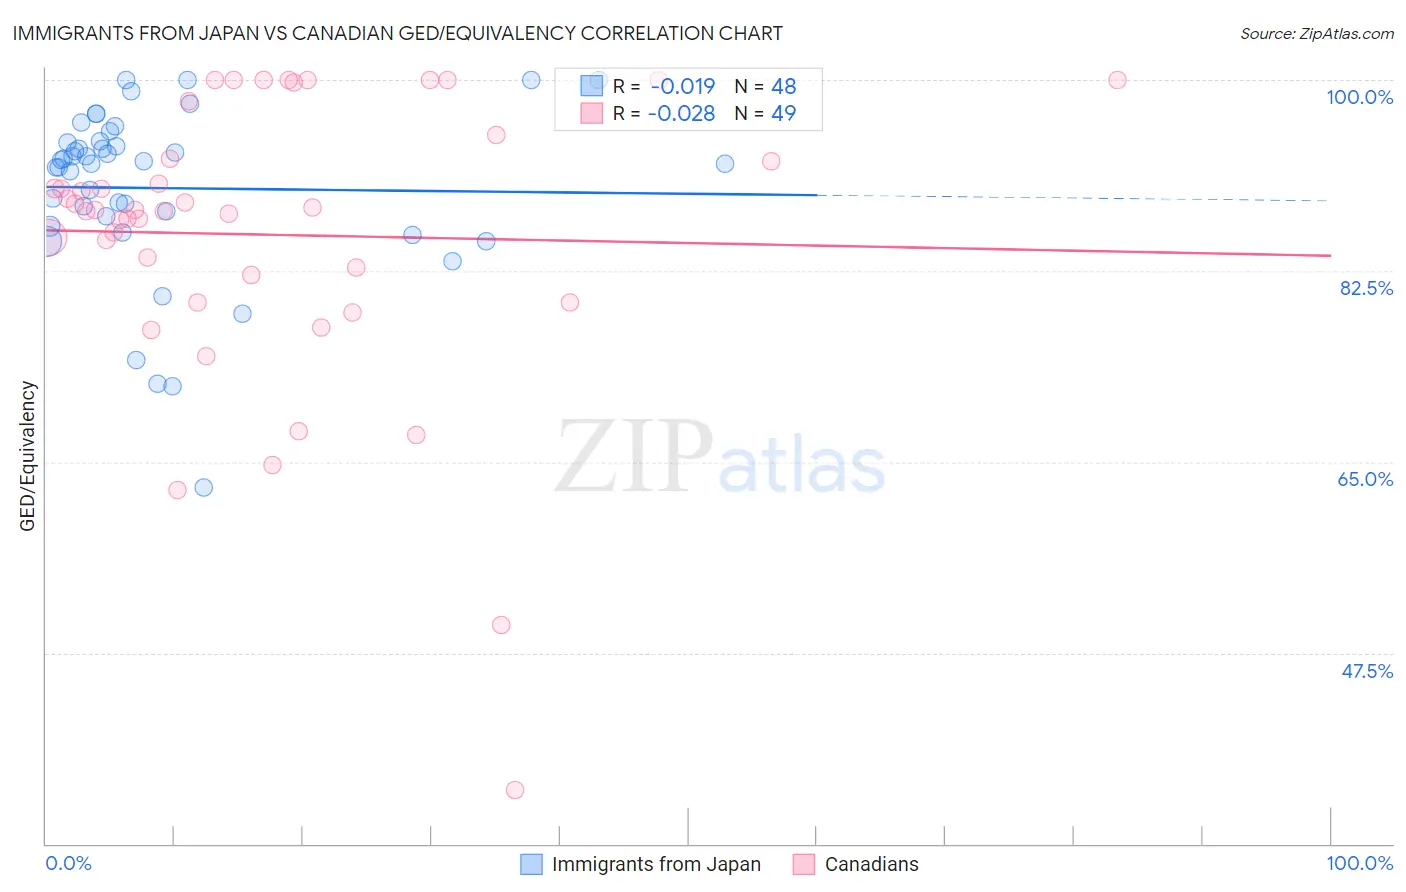 Immigrants from Japan vs Canadian GED/Equivalency